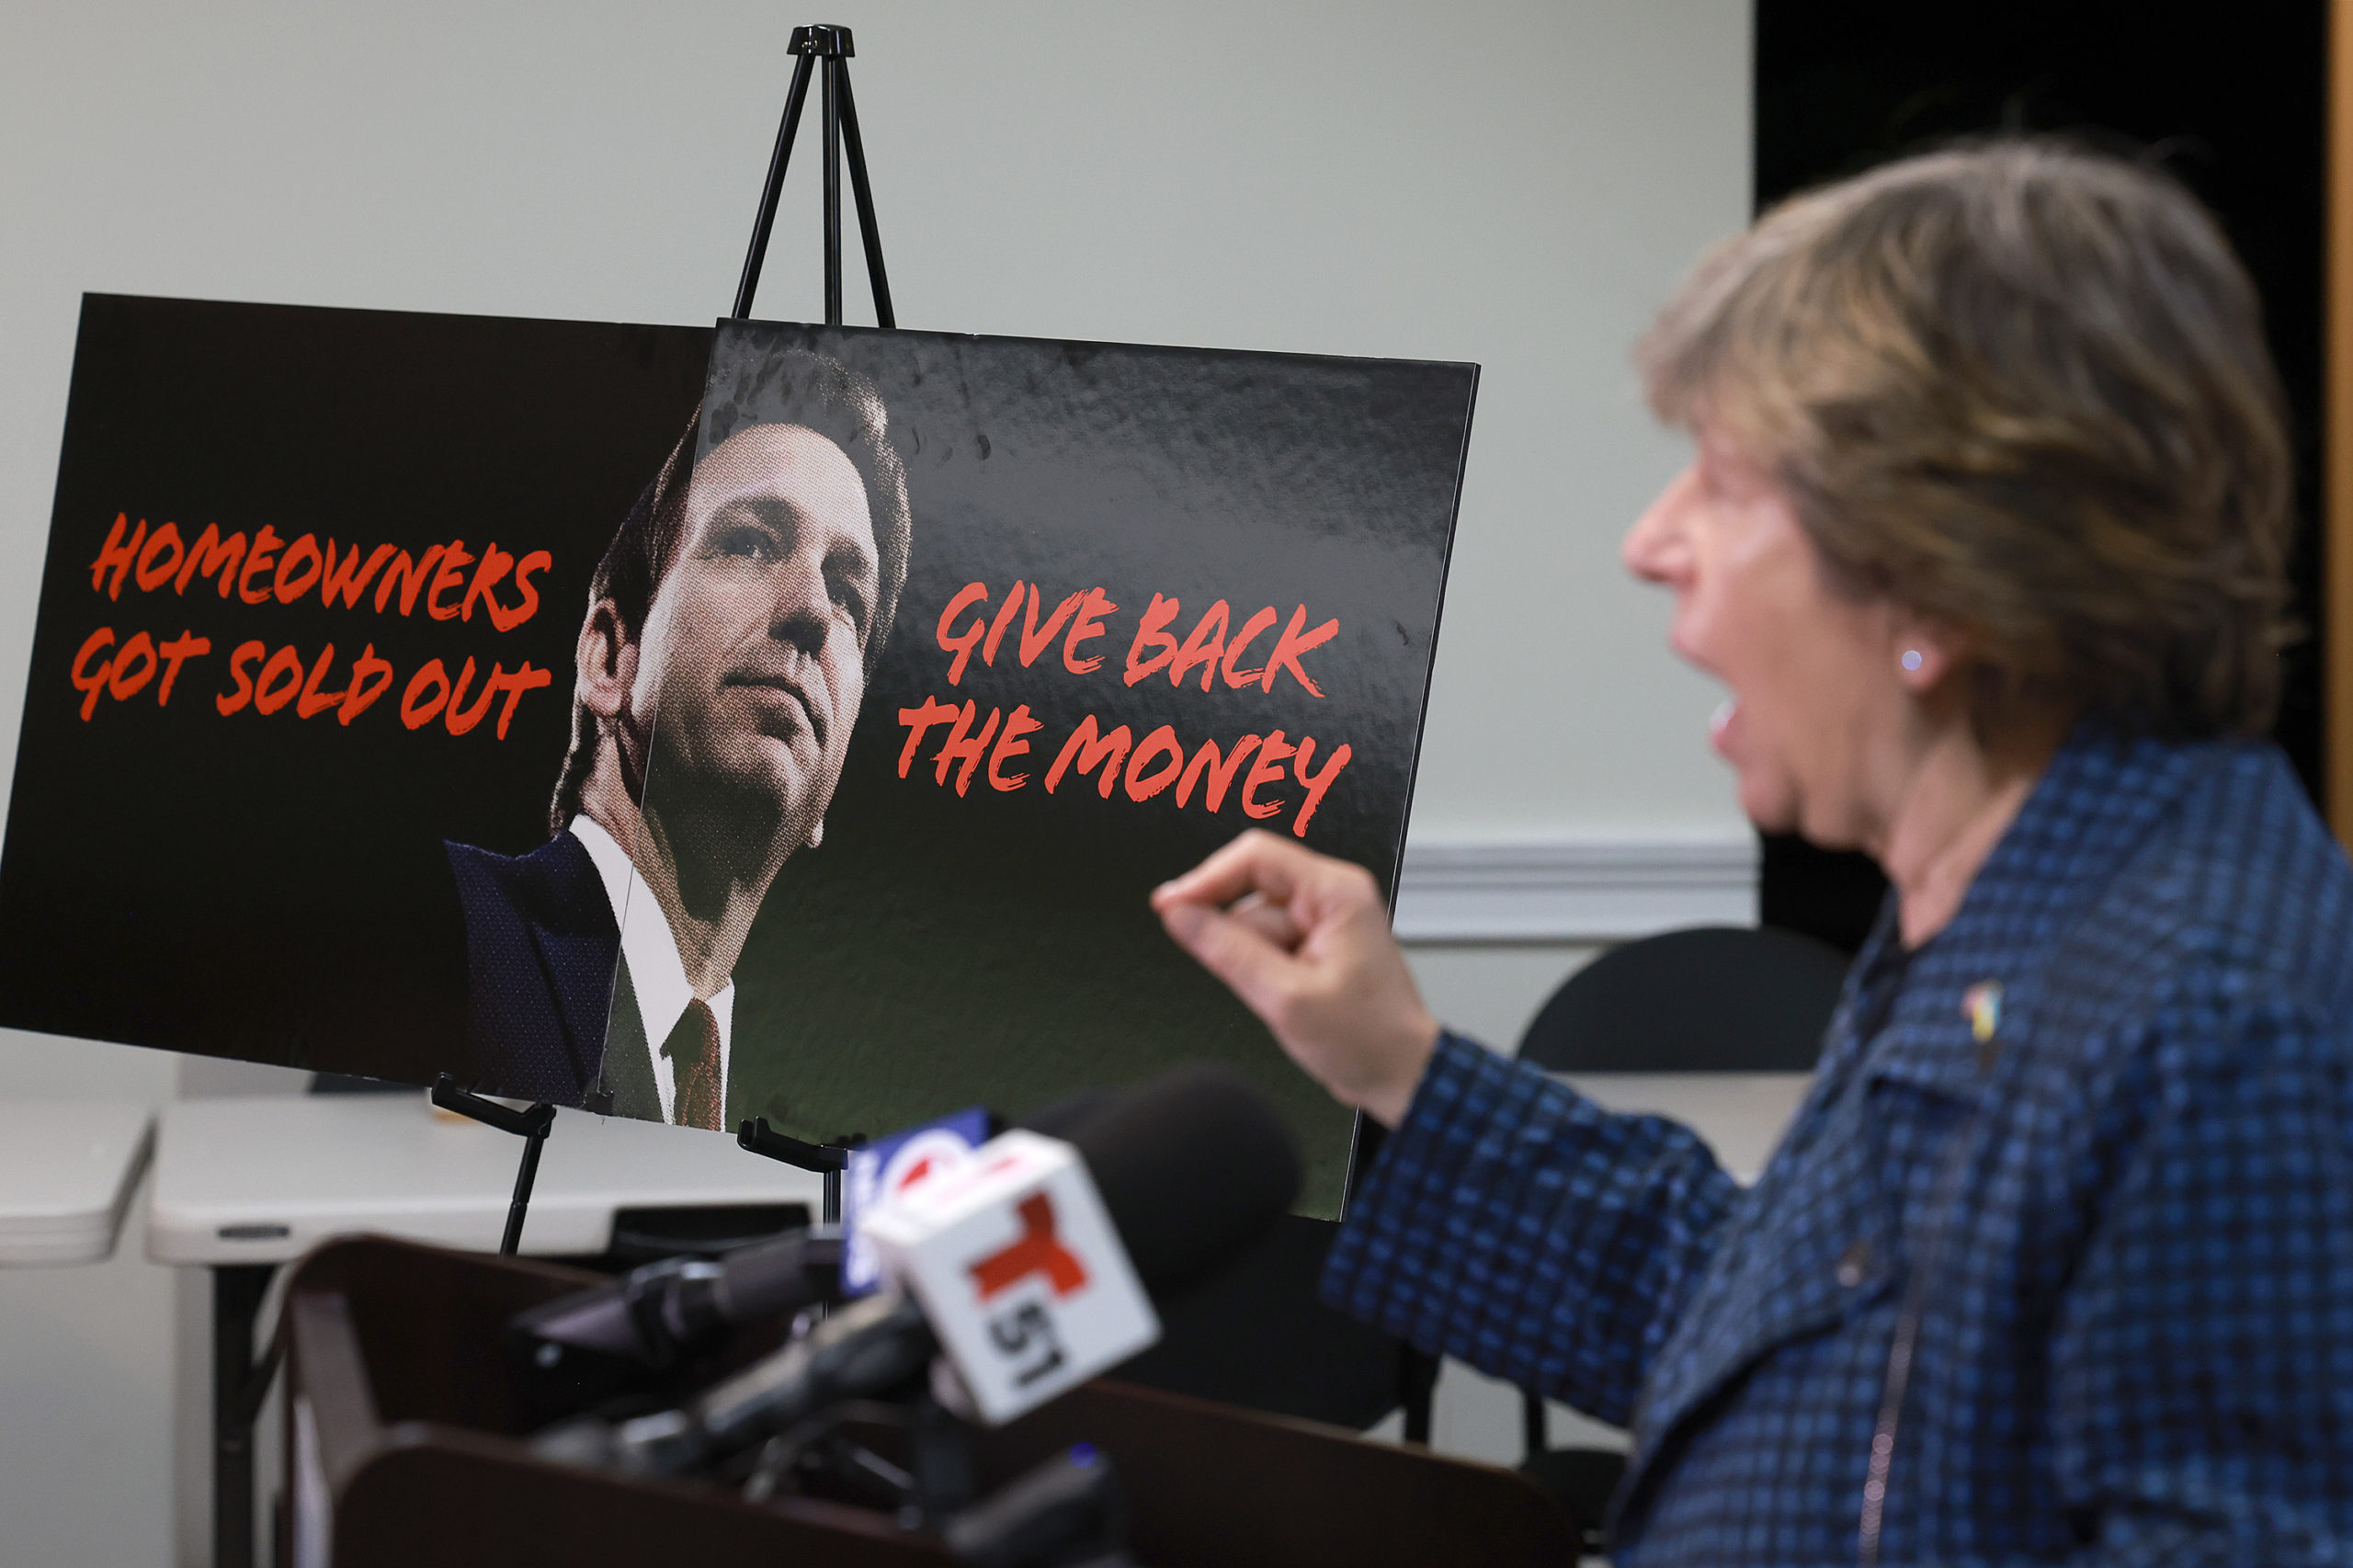 A poster with a picture of Florida Governor Ron DeSantis is posted next to Randi Weingarten, President American Federation of Teachers, as she speaks during a press conference condemning the Governor and his alleged role in insurance costs skyrocketing for Floridians on May 03, 2023 Tamarac, Florida. Florida's average home insurance costs have nearly doubled. As a result, teachers, middle-class and poor people are having difficulty affording the cost of owning or renting a home and now pay about three times the national average. (Photo by Joe Raedle/Getty Images)